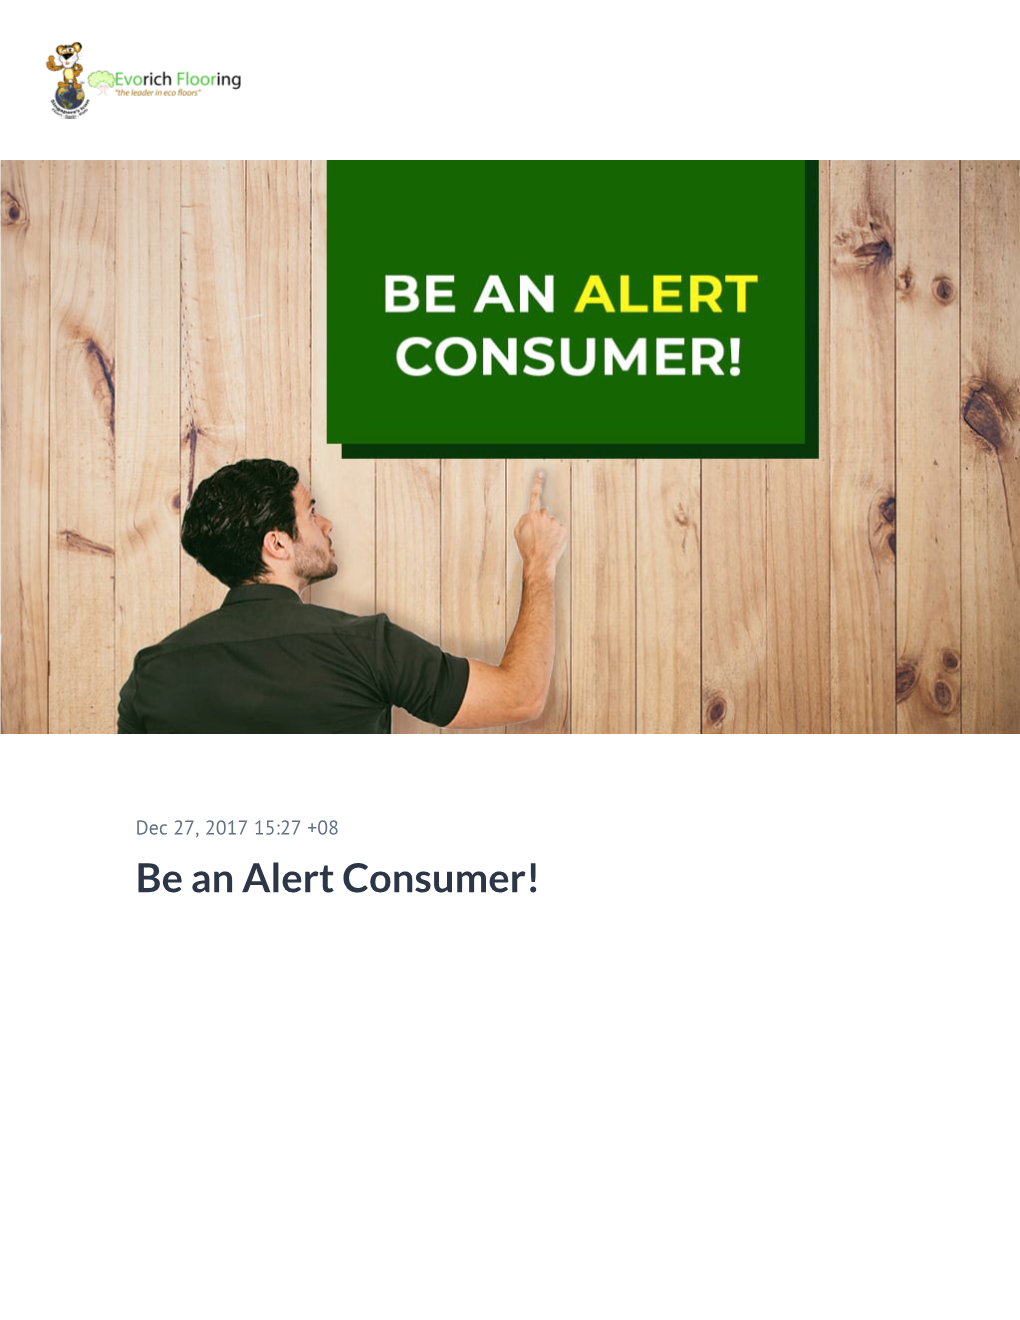 Be an Alert Consumer! If You Come Across Any Company Or Anyone Stating That Their Material Is Similar to Evo HERF, Please Ask for the Following